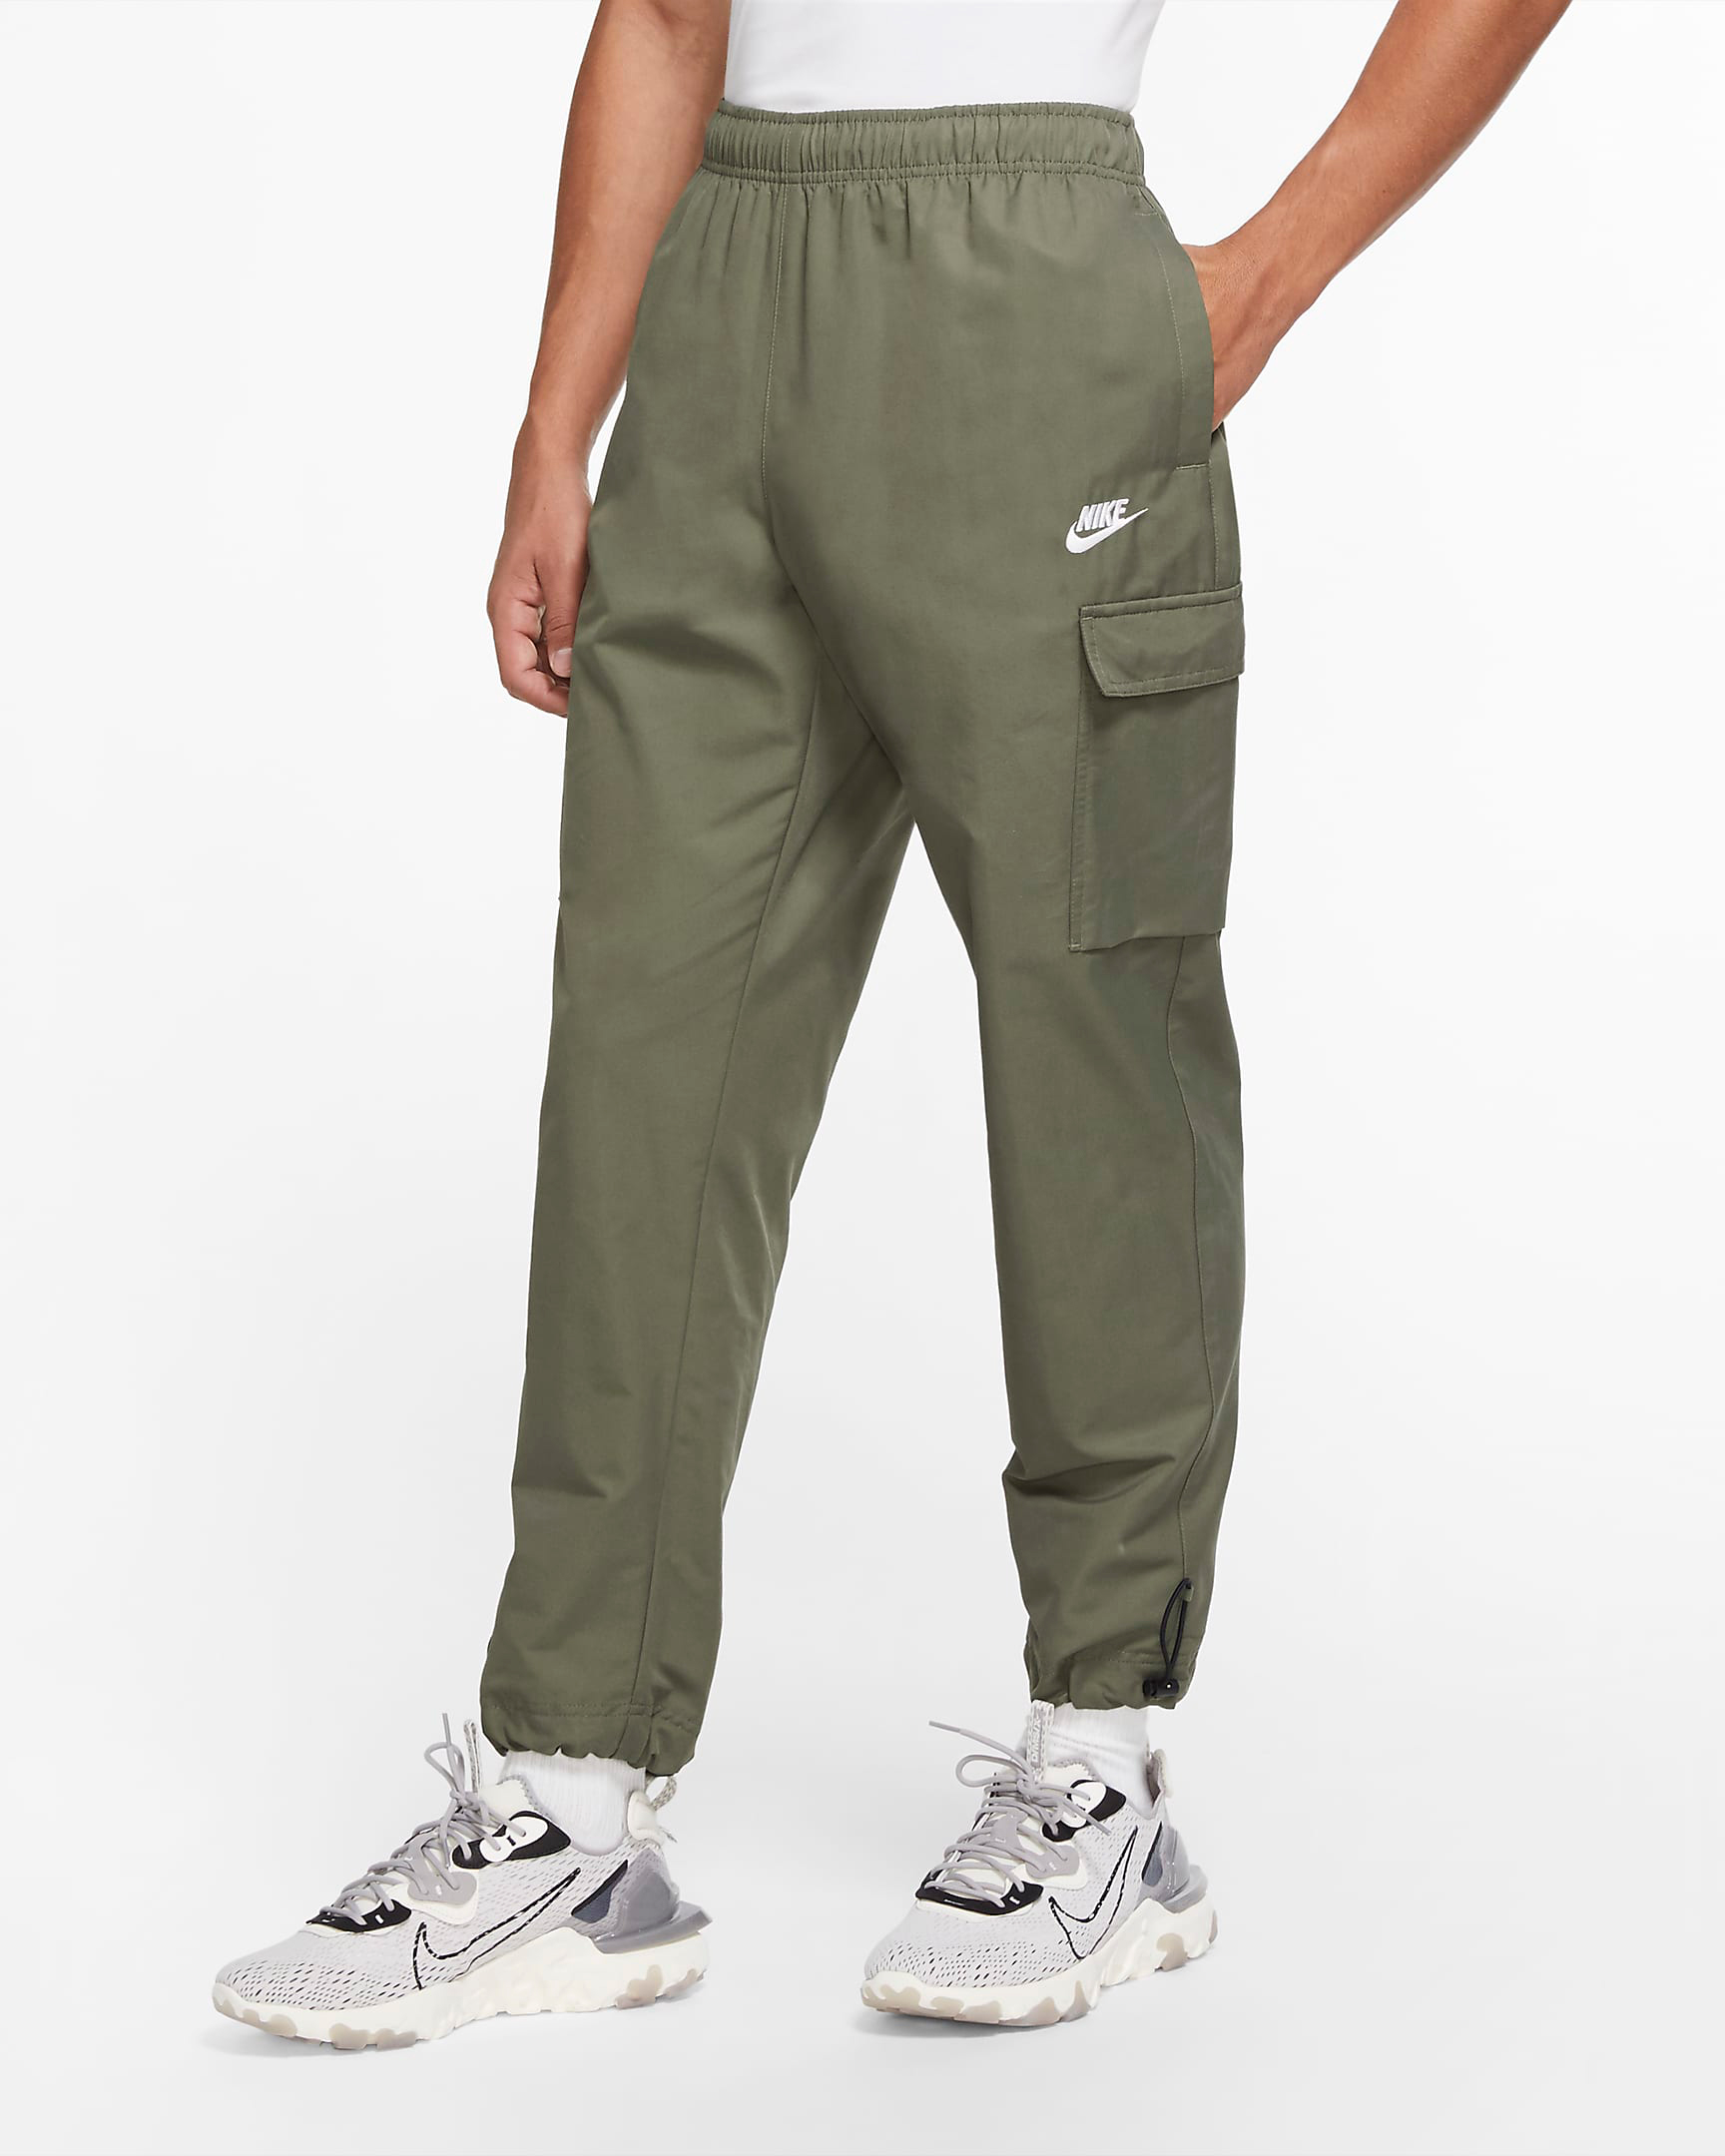 nike-air-tuned-max-celery-cargo-pants-1